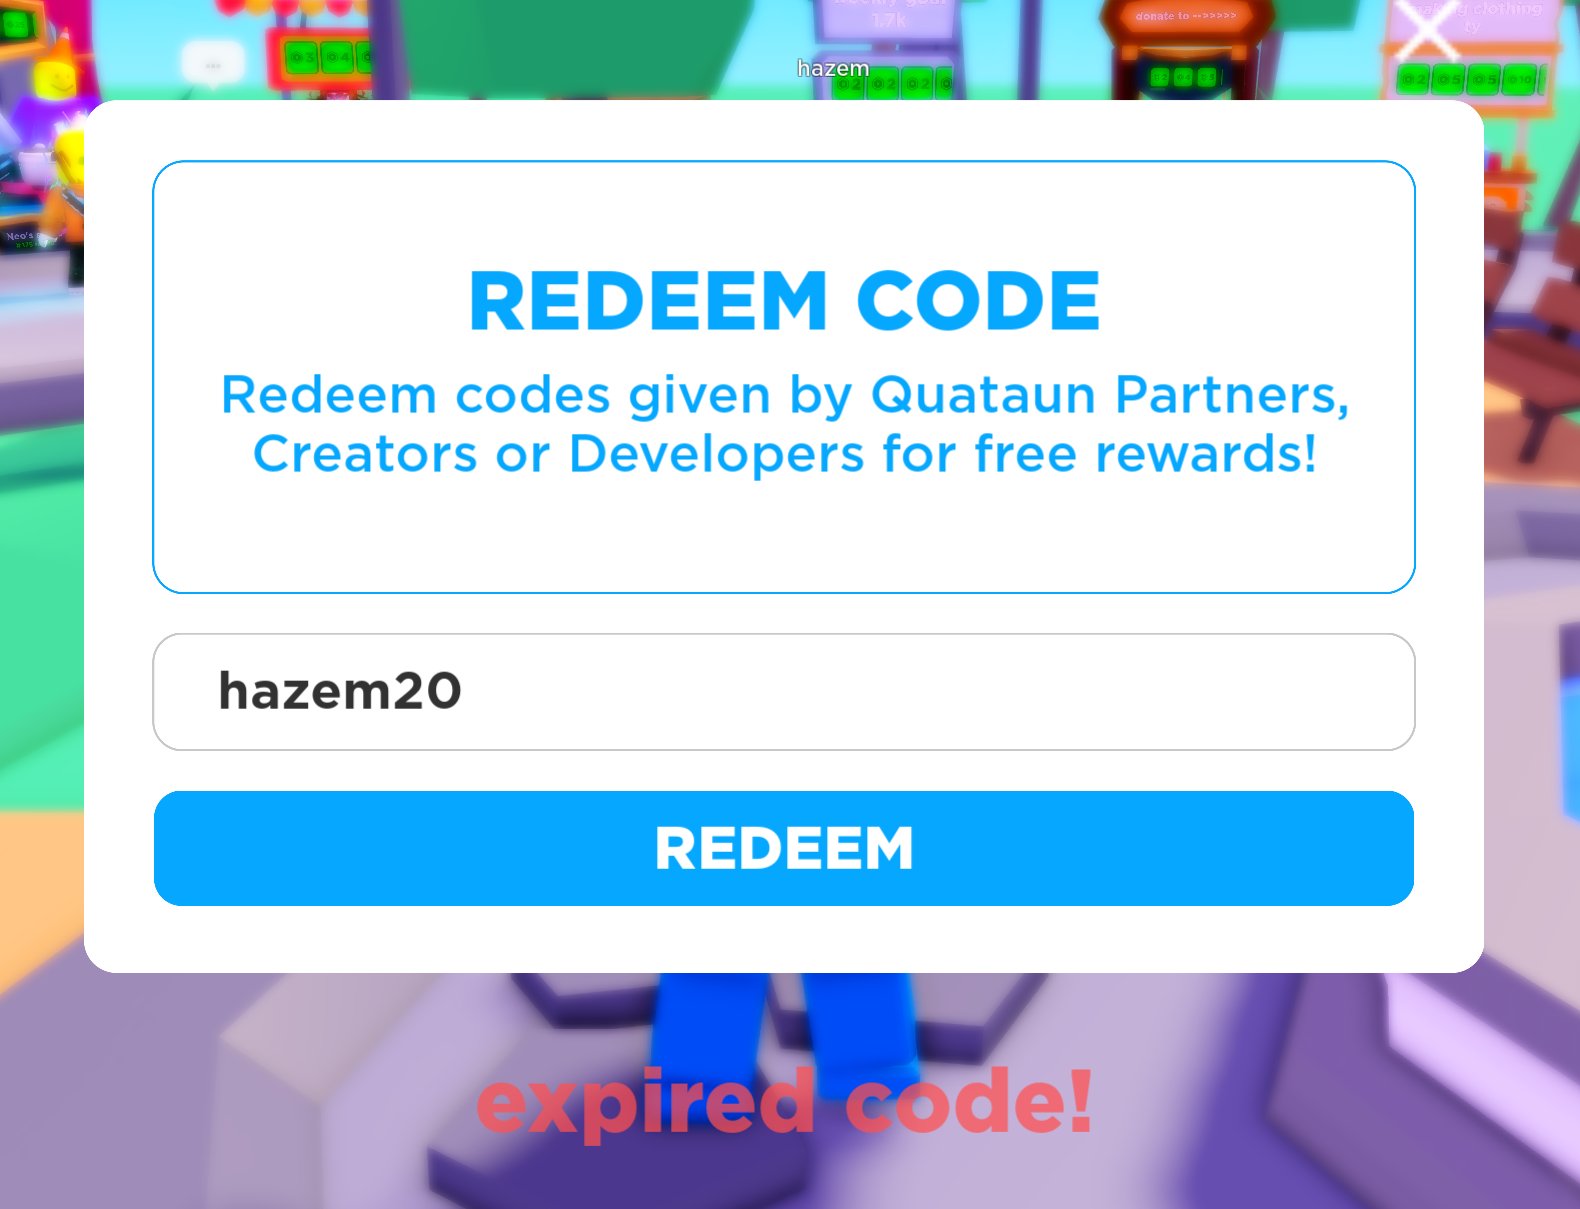 You Can Now Redeem Hazem's FREE ROBUX CODES In PLS DONATE (Roblox) 